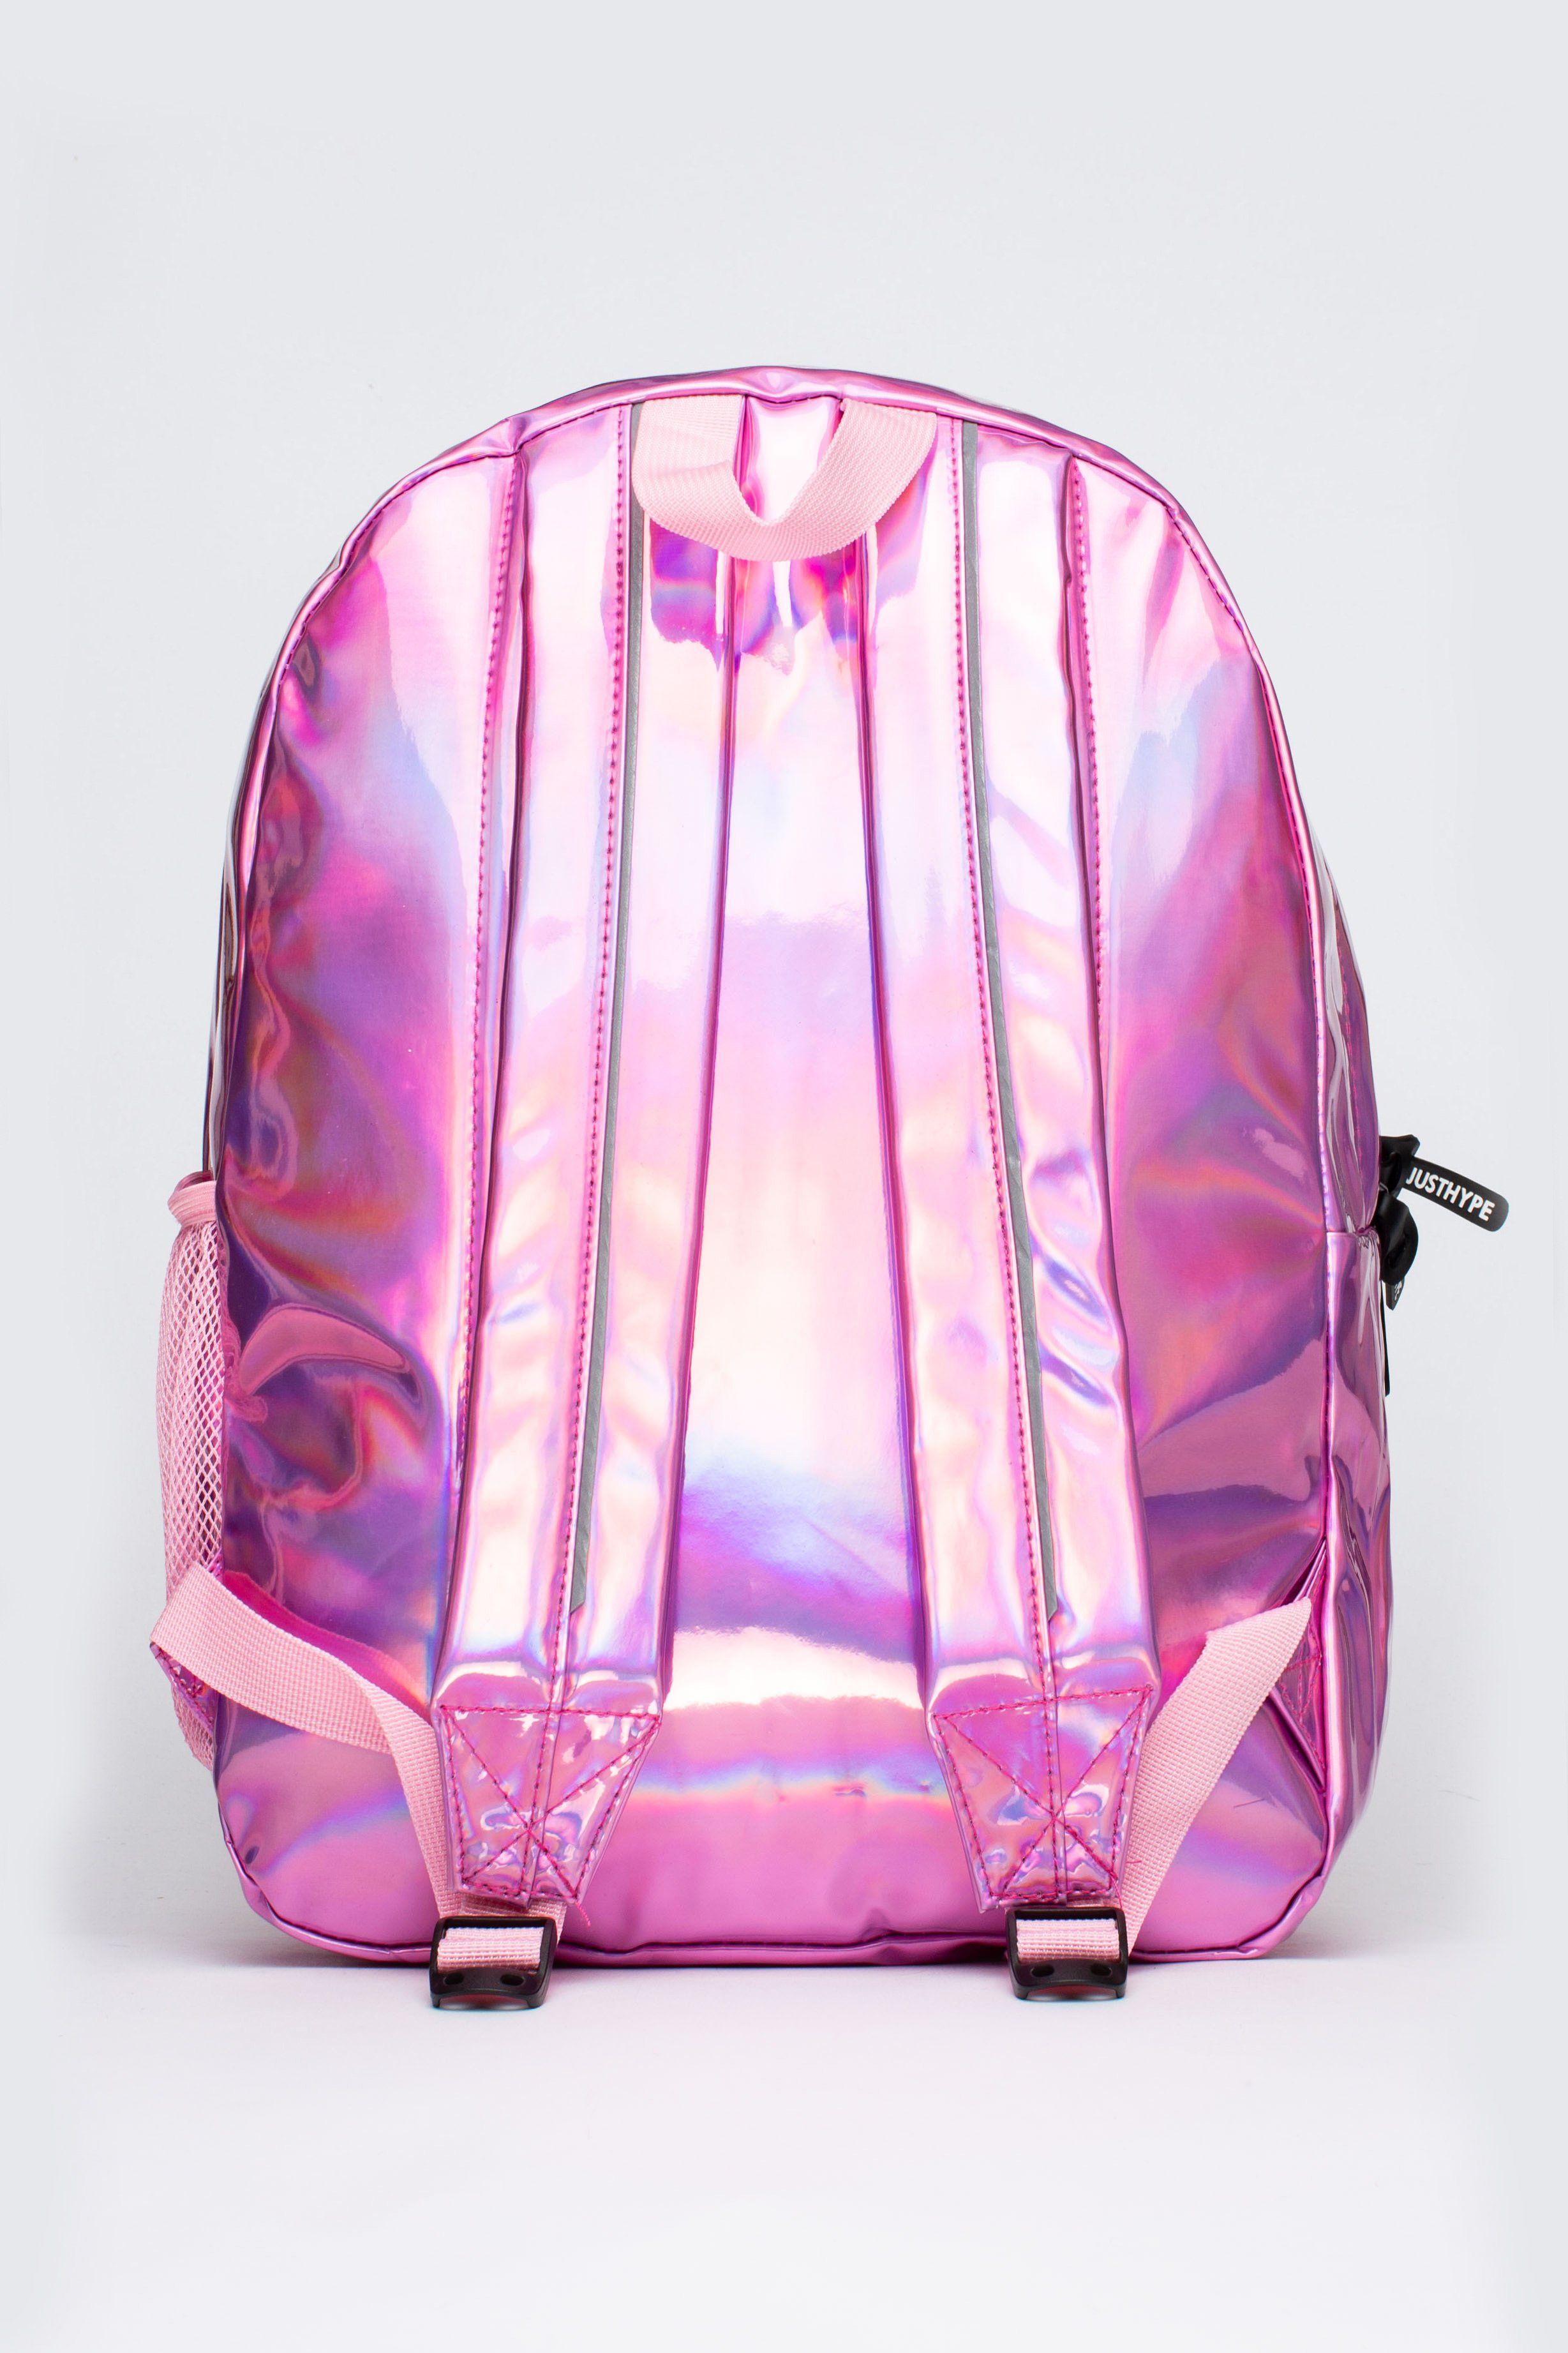 Hype Pink Holo Utility Backpack